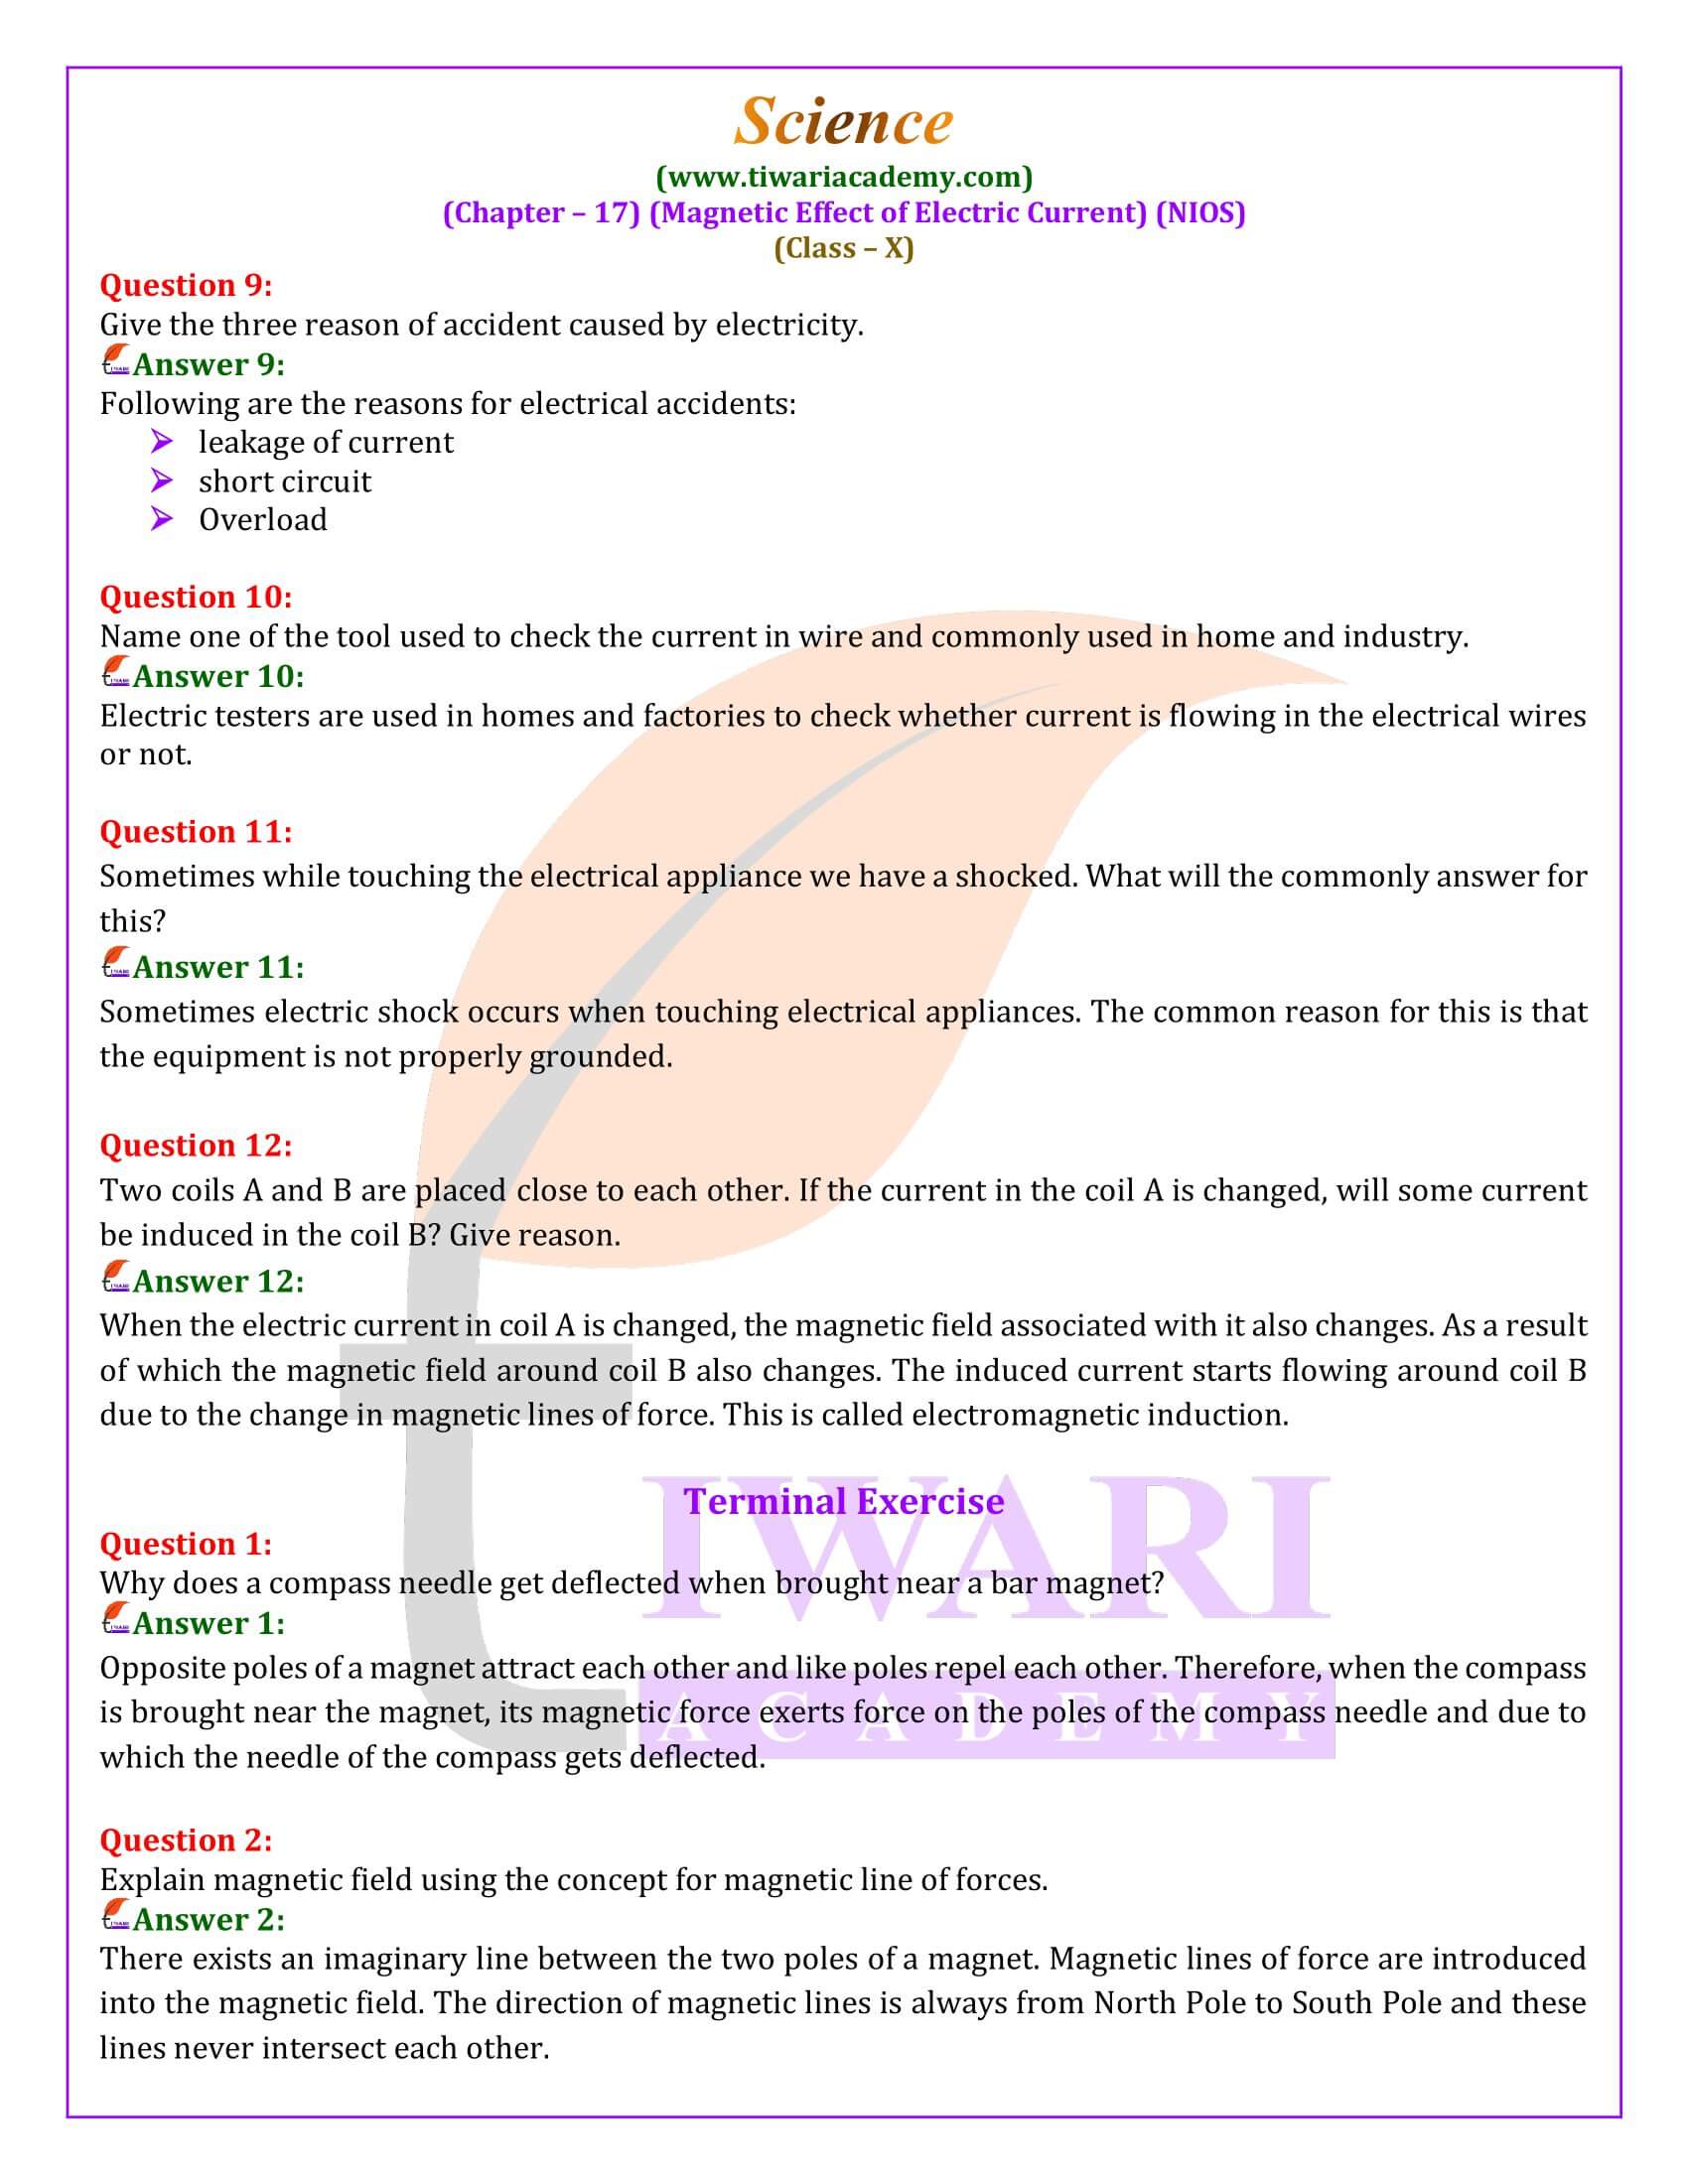 NIOS Class 10 Science Chapter 17 Guide in Hindi and English